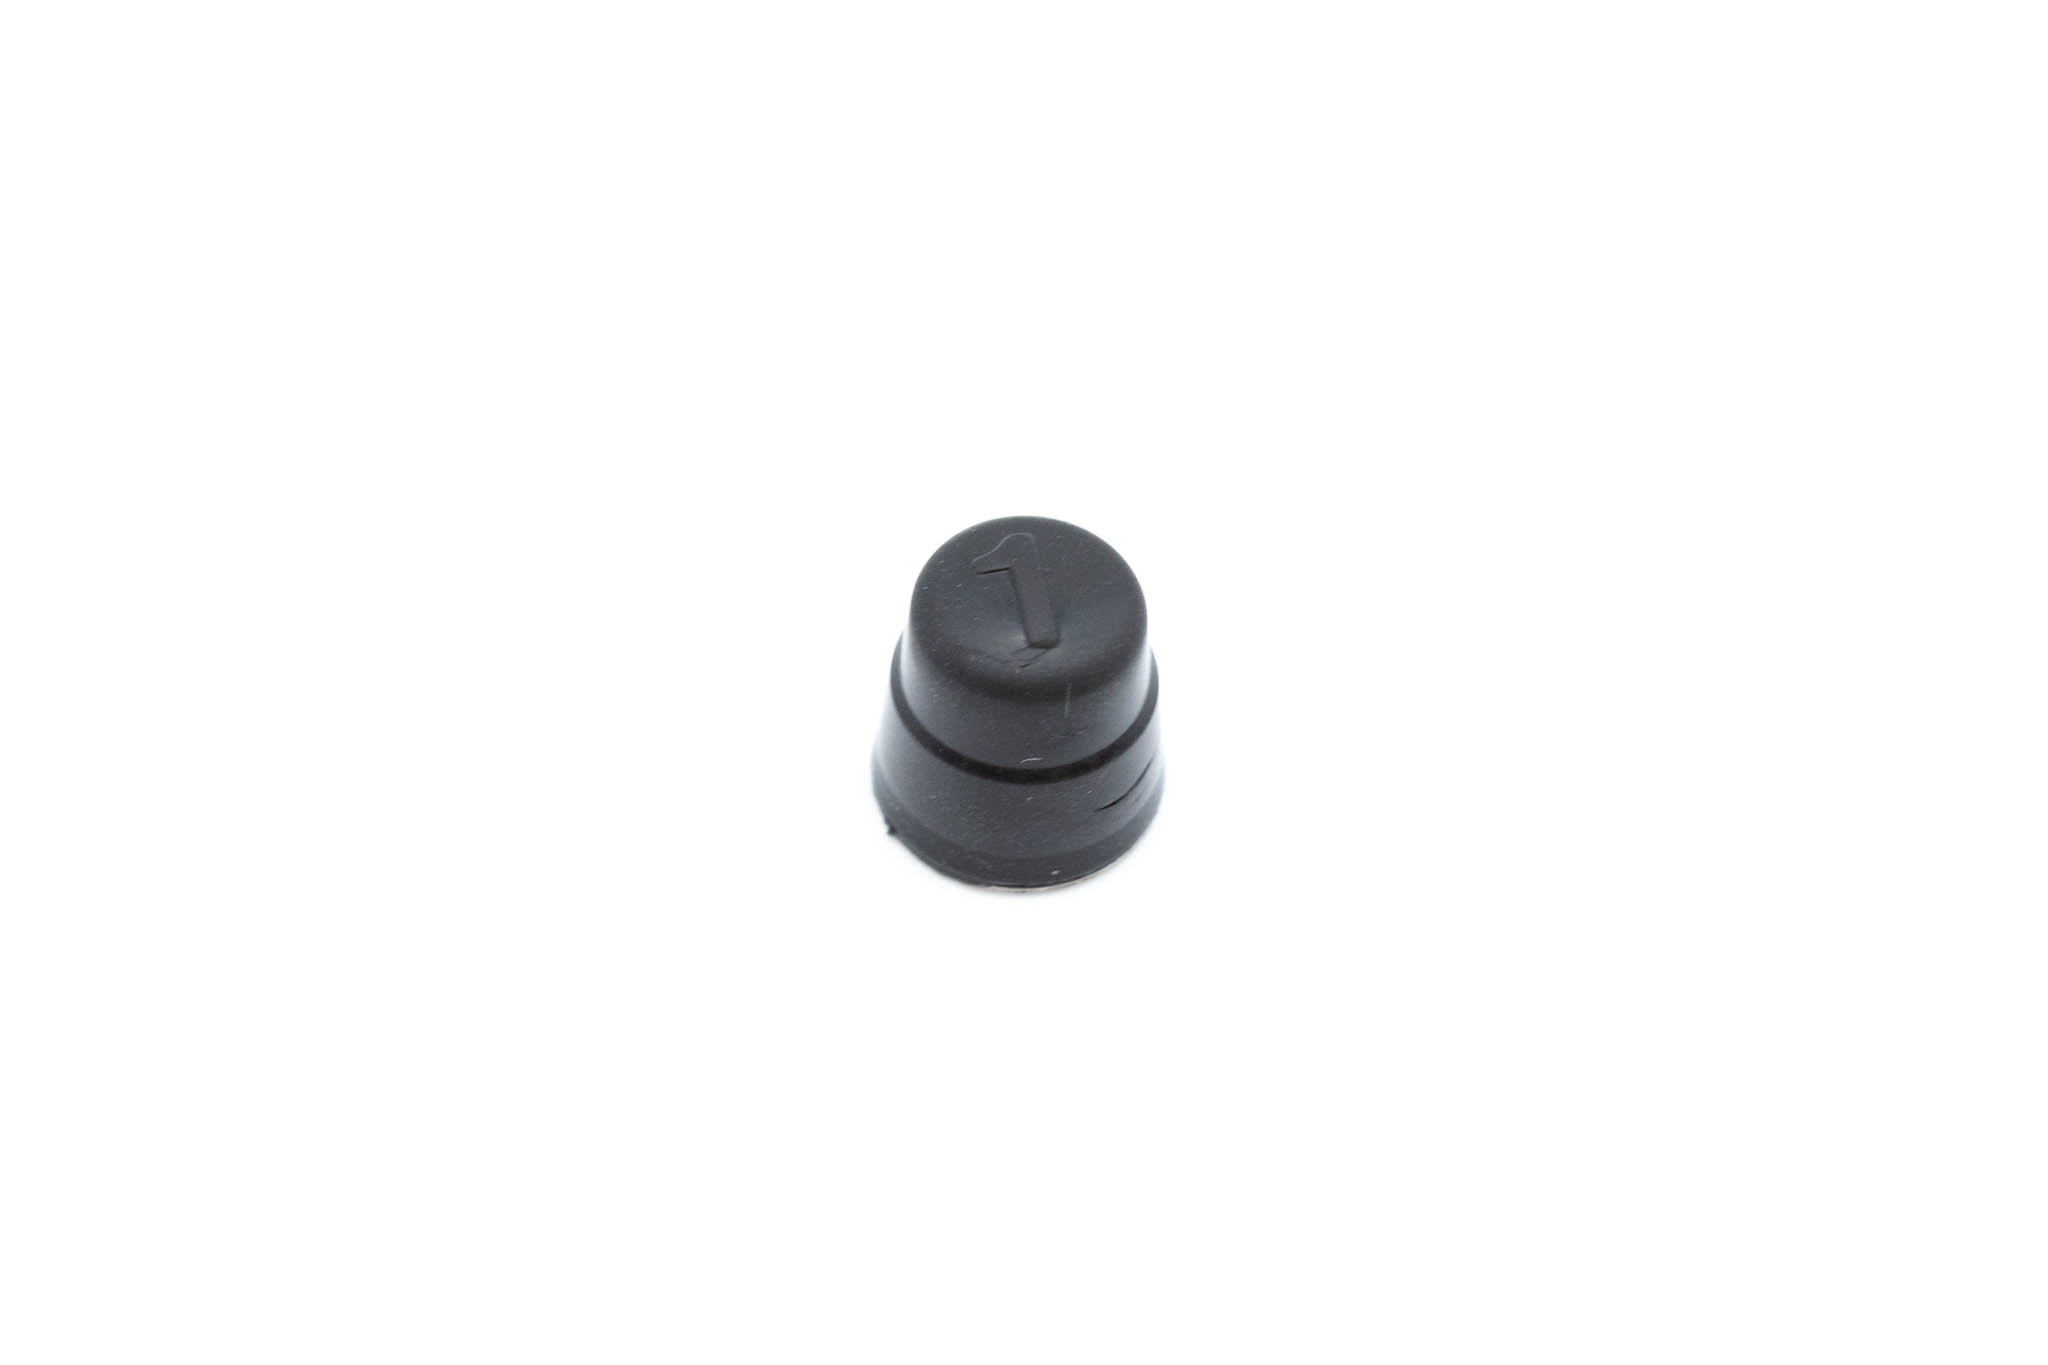 OEM Number One Button - BF-1T200, BF-200, BF-P200, CYF-200, ENF-240